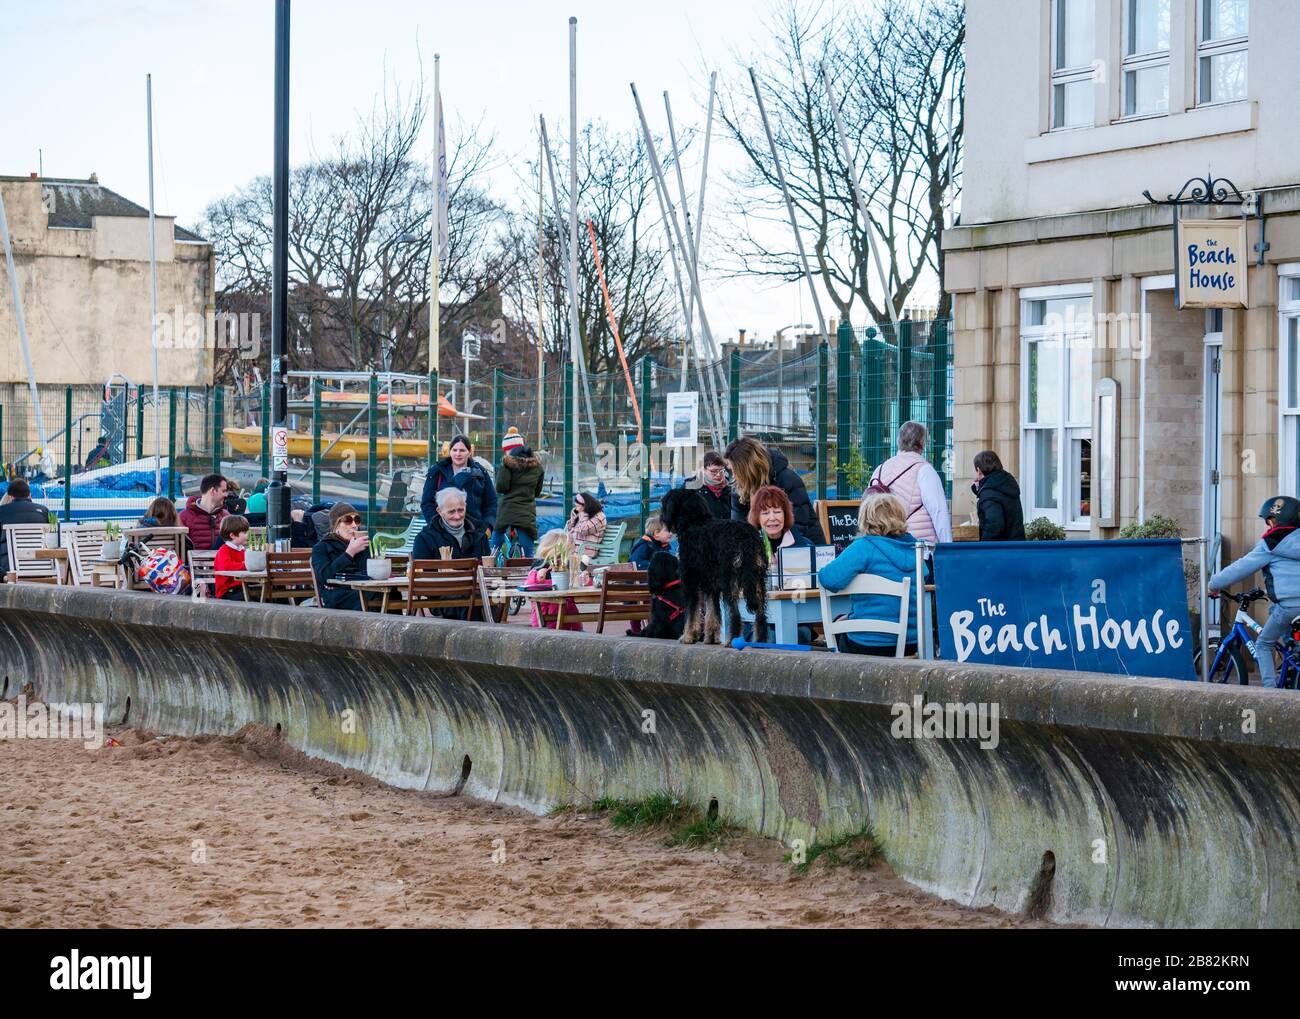 Portobello beach, Edinburgh, Scotland, United Kingdom. 19th March 2020. On a sunny Spring day, people are out enjoying the seaside. People sitting at the Beach House cafe pavement tables  during the Covid-19 Coronavirus pandemic Stock Photo